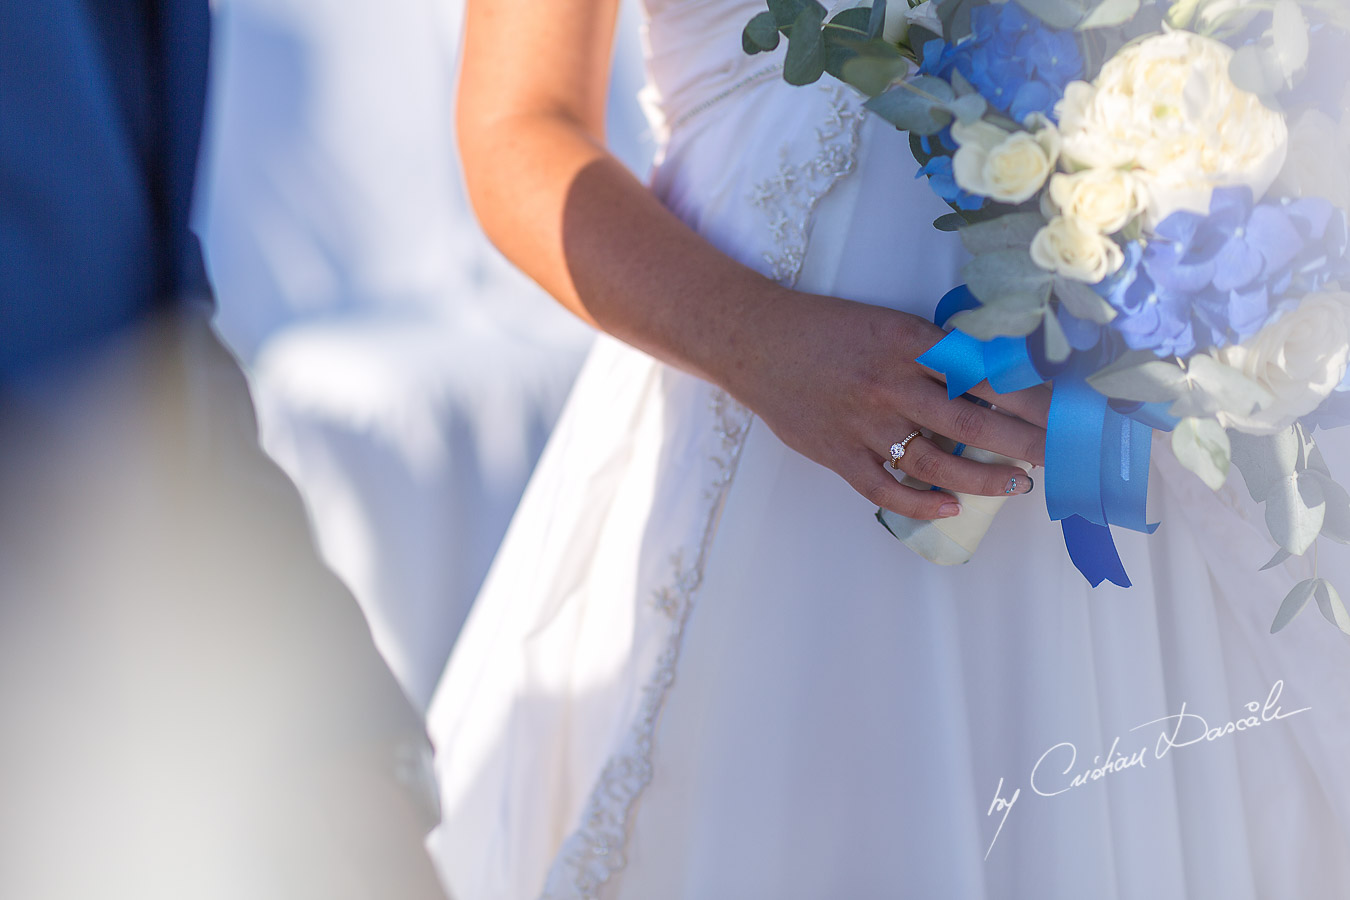 Engagement ring photographed during wedding ceremony at Elias Beach Hotel in Limassol